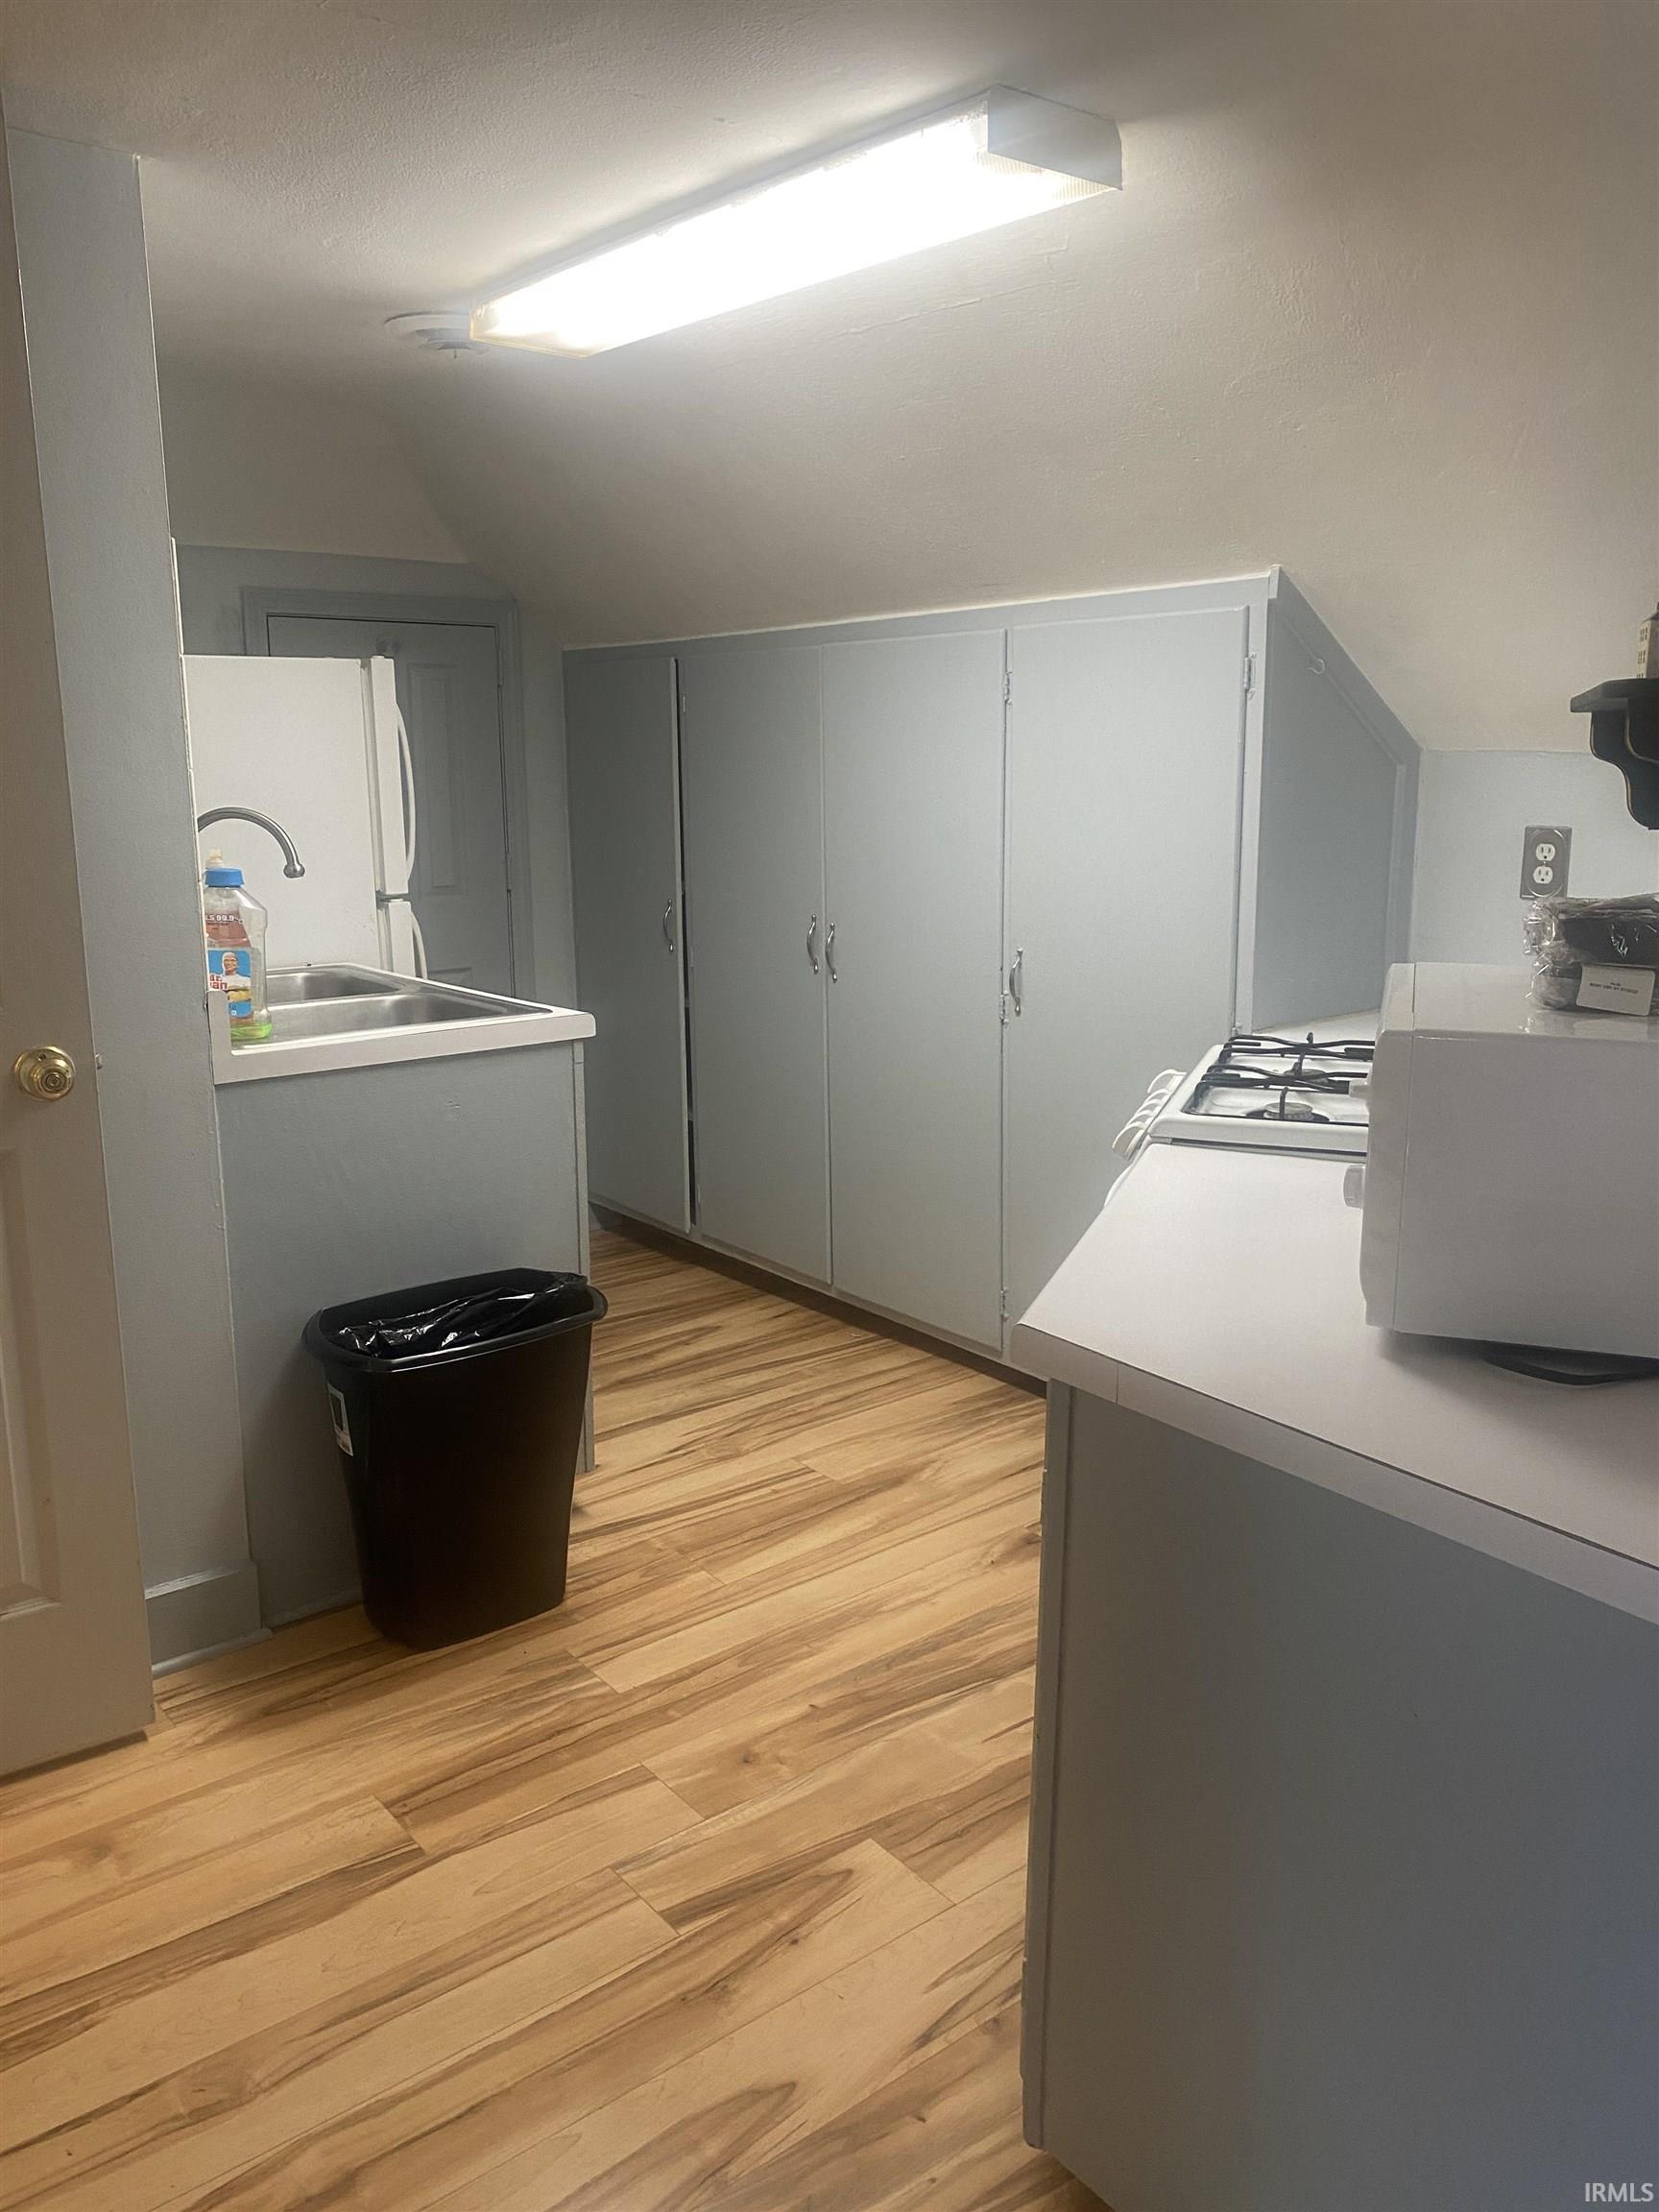 Kitchen of the two bedroom upper level Apartment